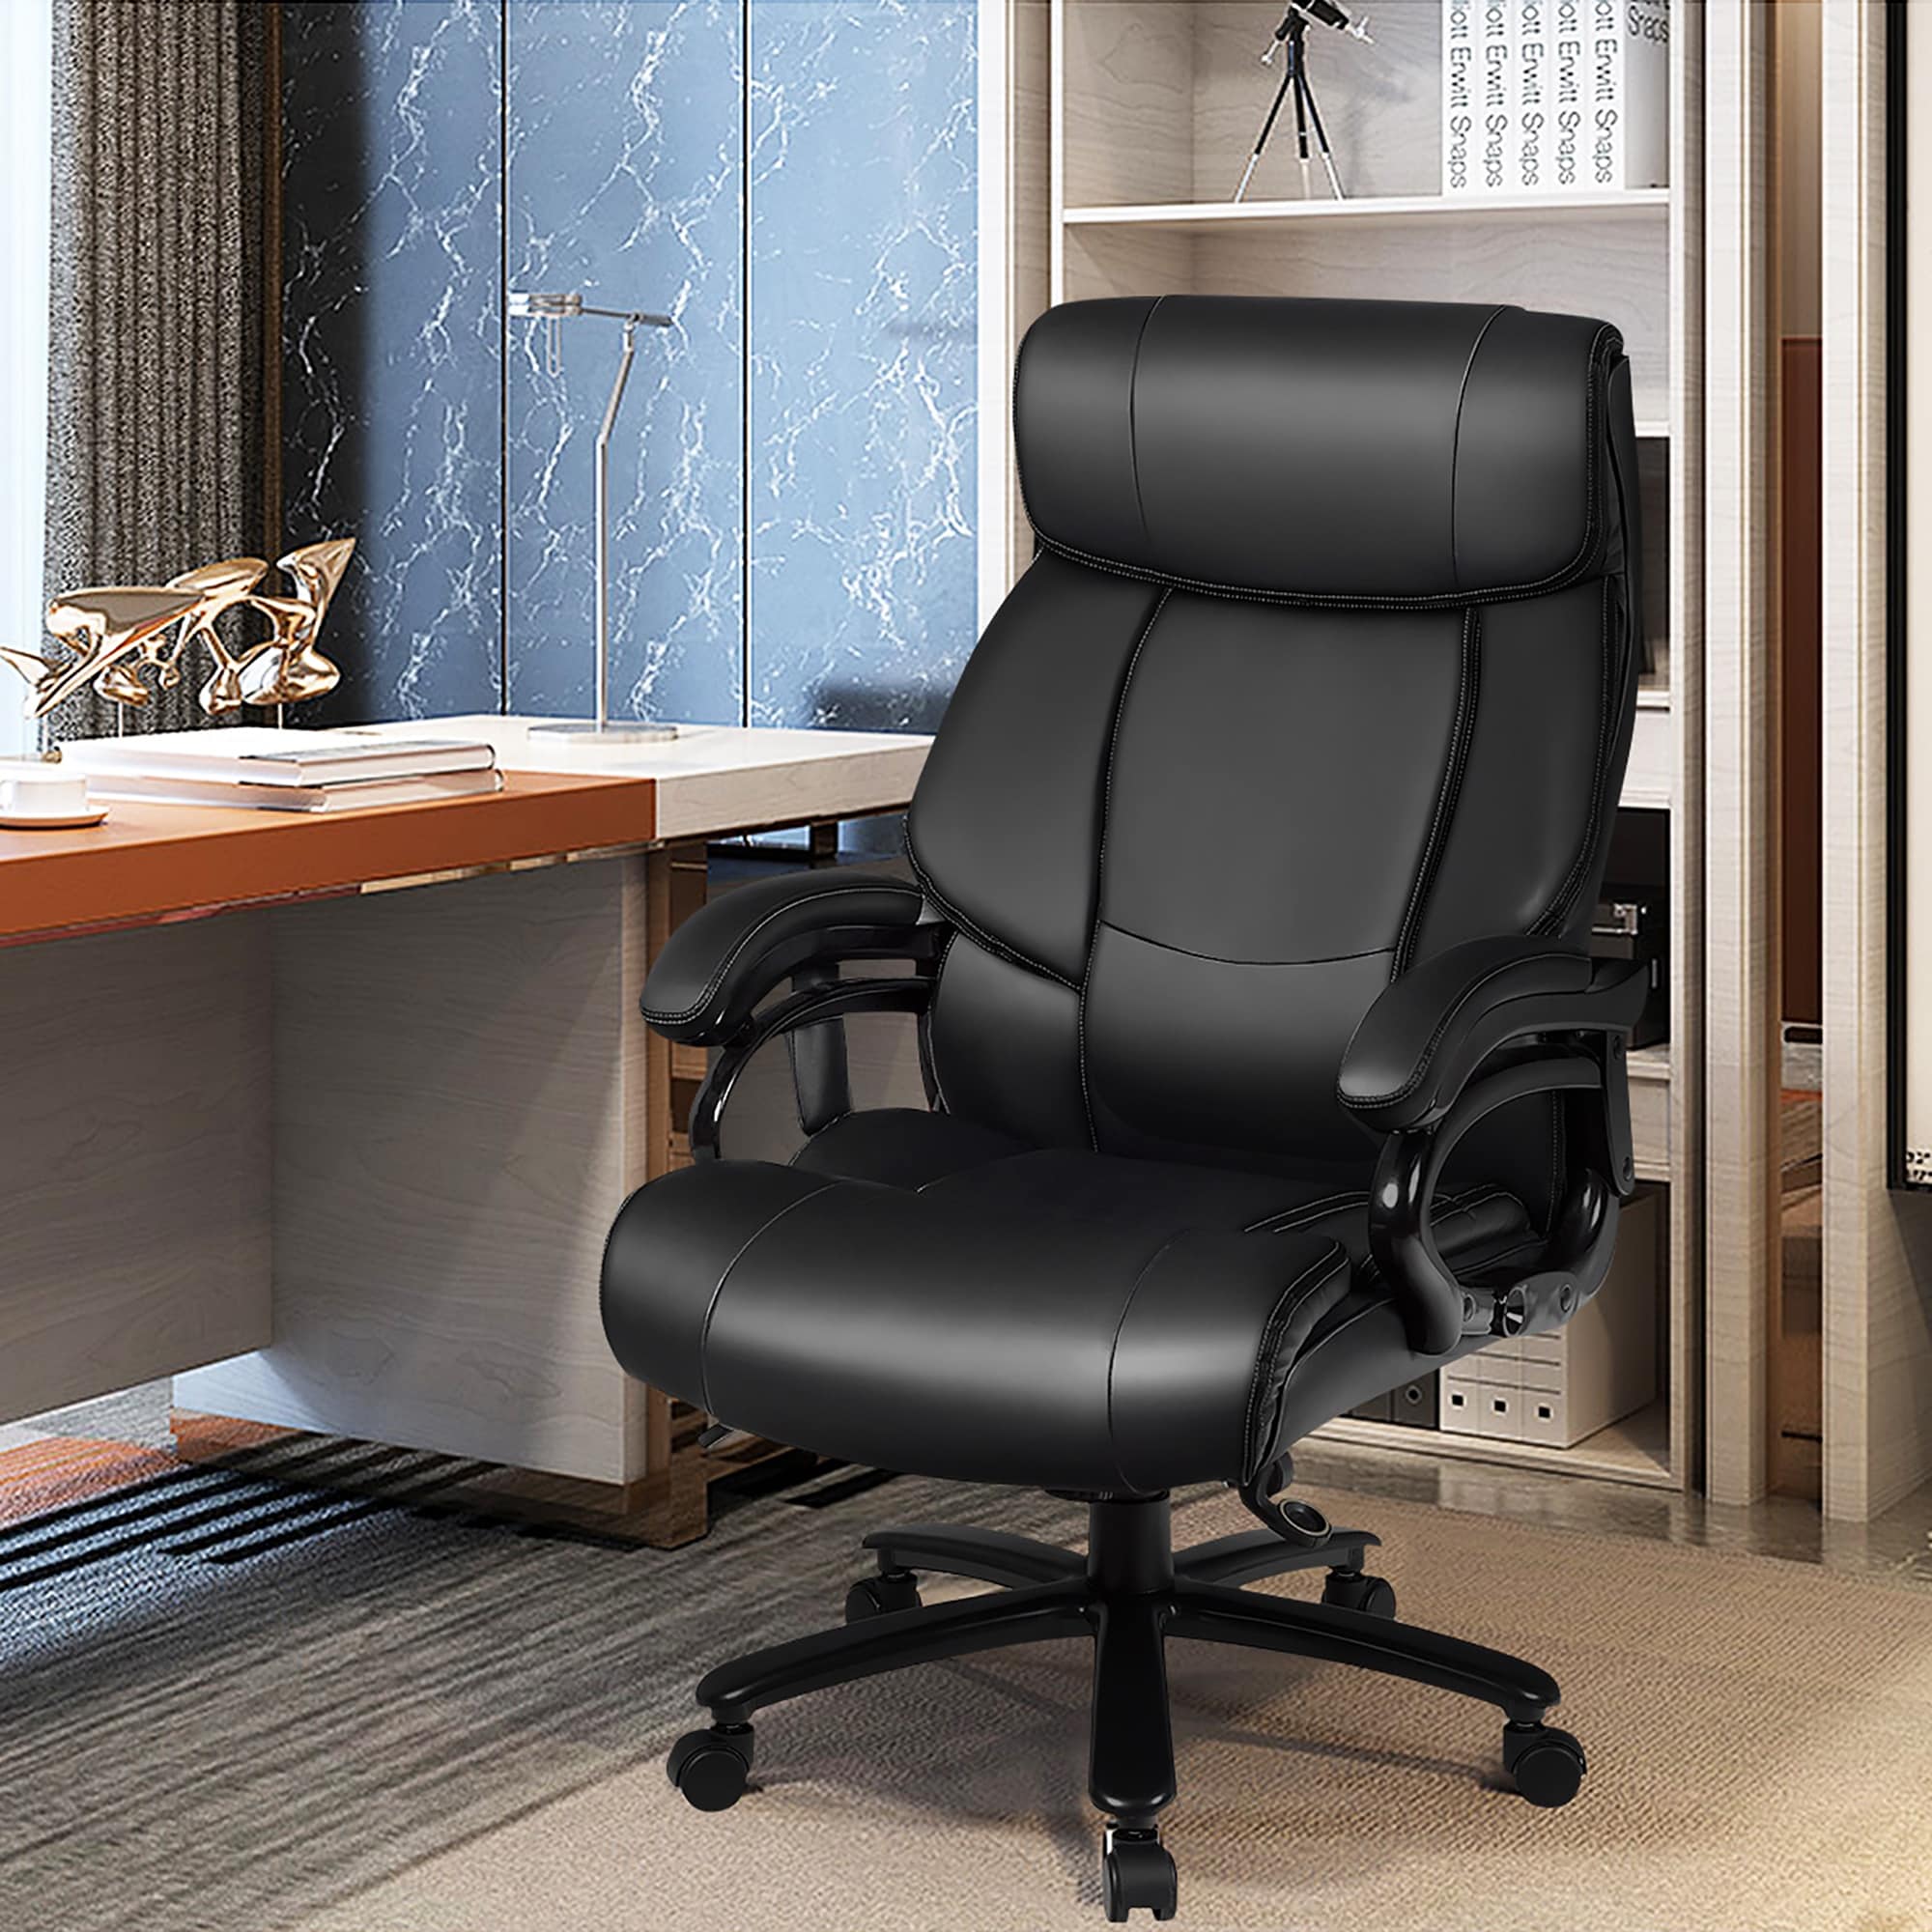 https://ak1.ostkcdn.com/images/products/is/images/direct/1e643bbd356877cbbcd14baeceaf4fe8d8c40990/Costway-Big-%26-Tall-400lb-Massage-Office-Chair-Executive-PU-Leather.jpg